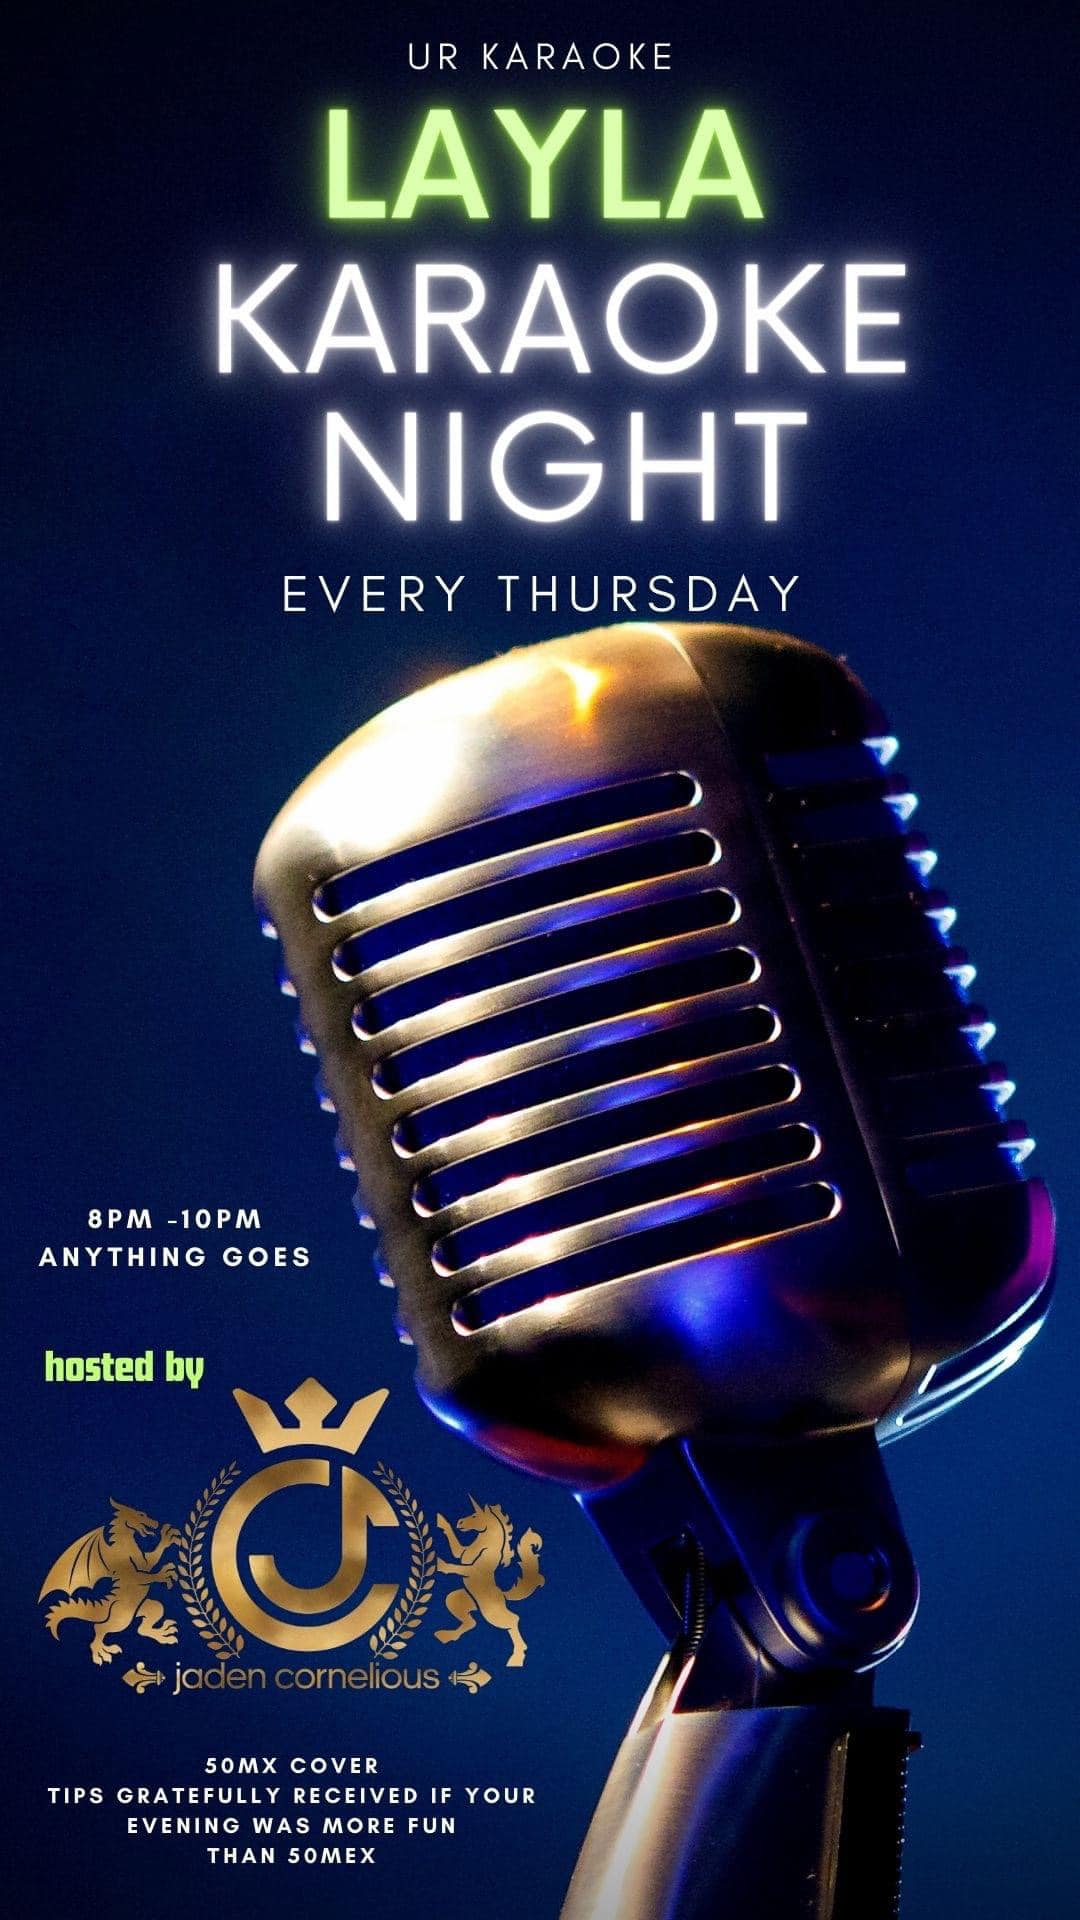 Flyer for Layla Karaoke Night every Thursday from 8-10pm.